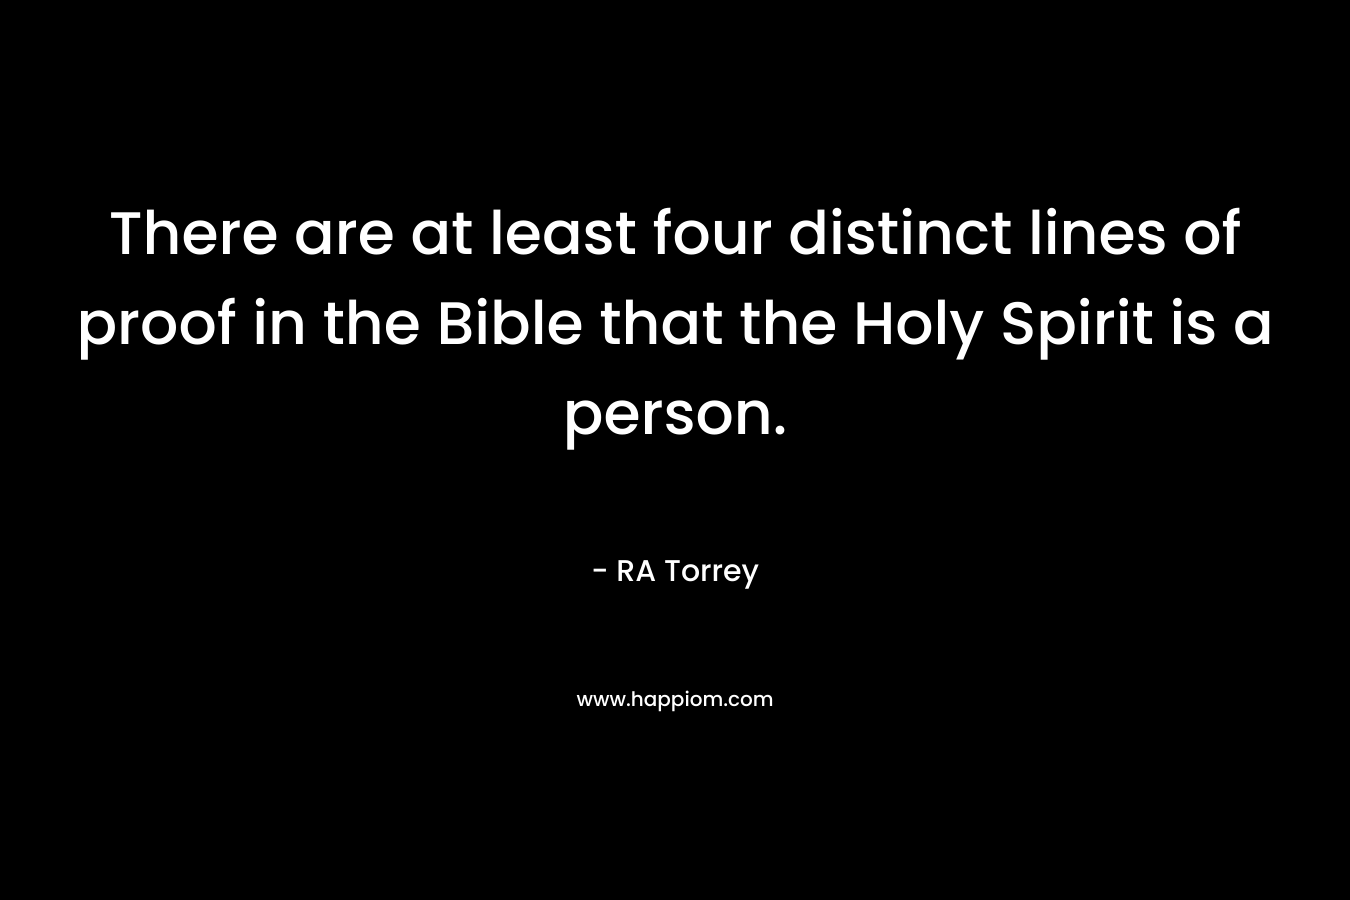 There are at least four distinct lines of proof in the Bible that the Holy Spirit is a person. – RA Torrey